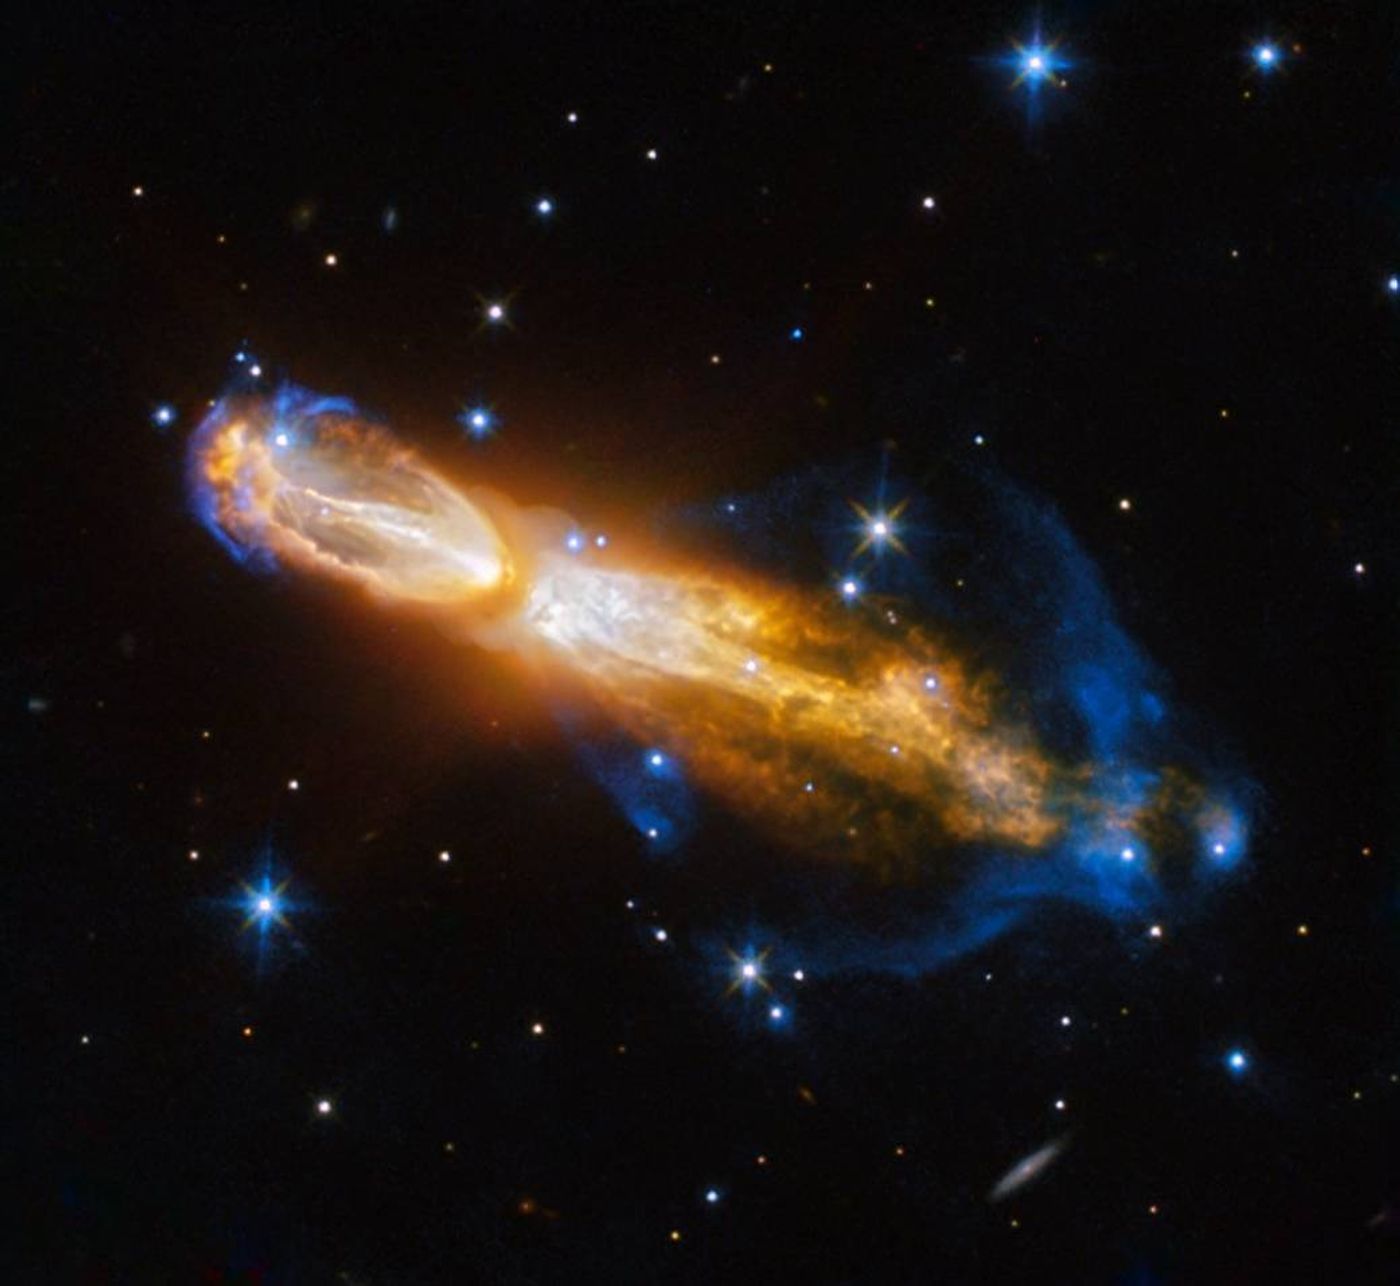 Hubble captured the following star explosion, which astronomers are currently observing.